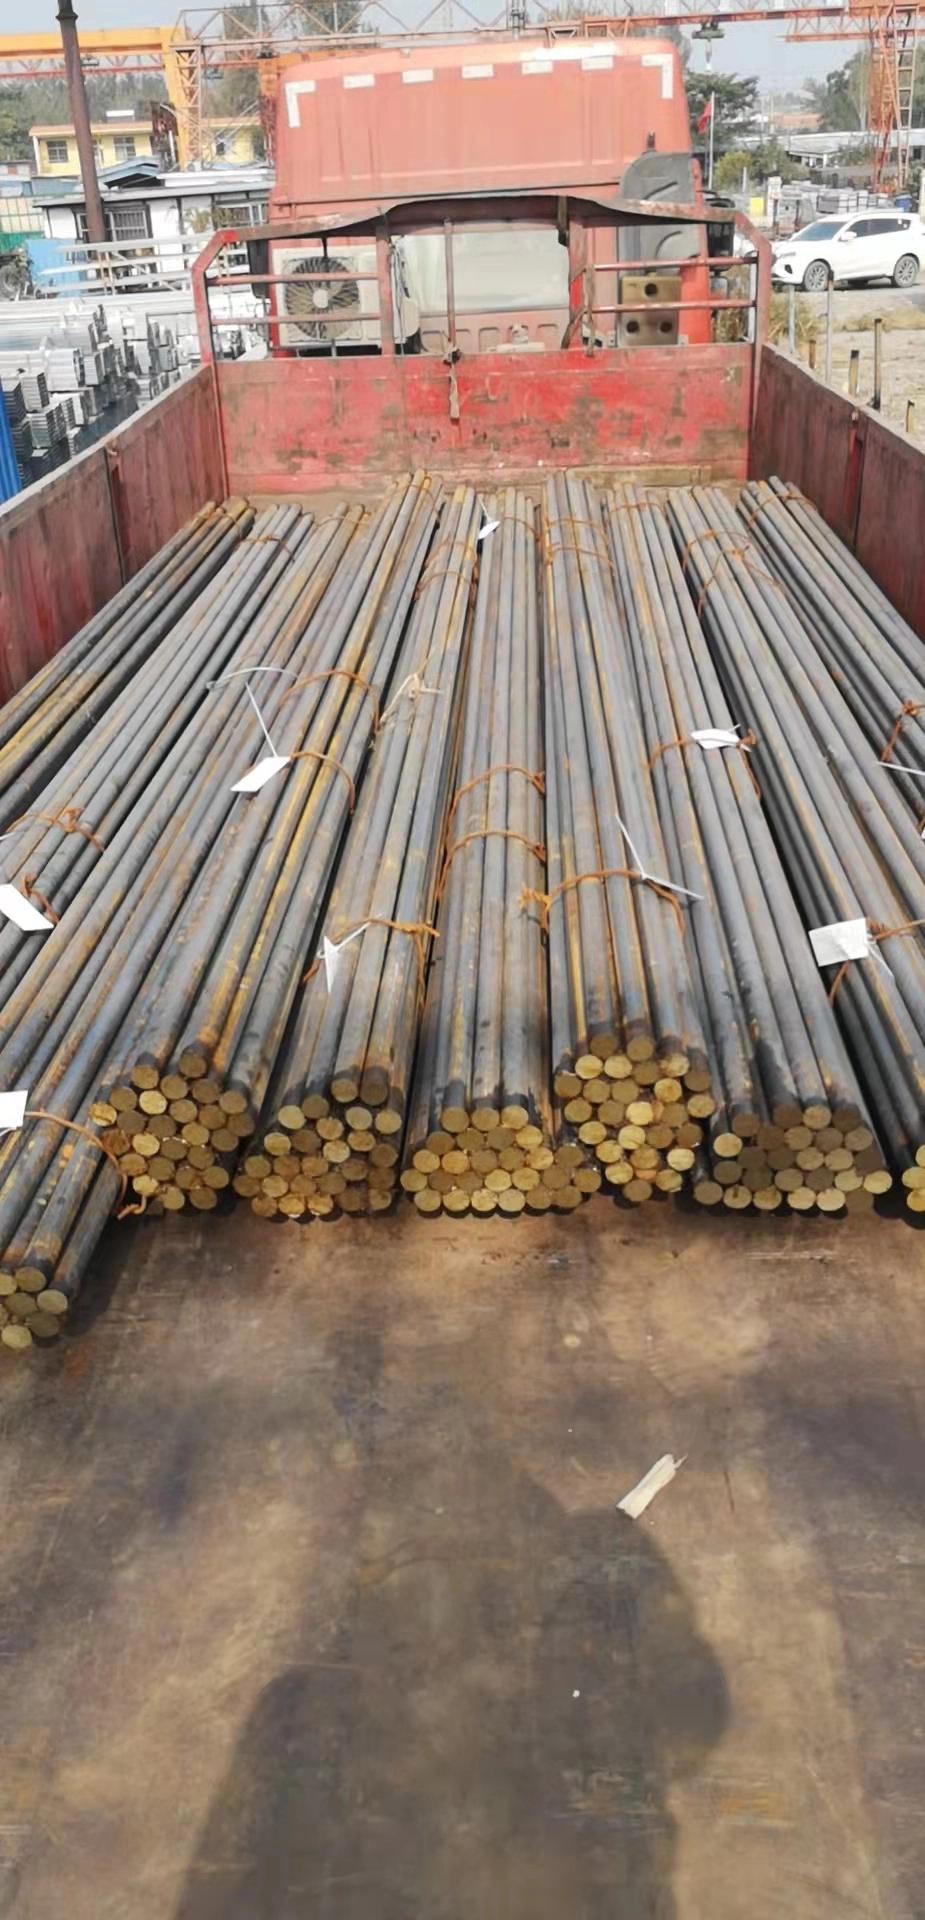 ASTM Ms 1020 1045 1050 C45 S40c S45c S25c S20c 20# 4140 Carbon Steel Round Bar Steel Rod Price with Cutting Service